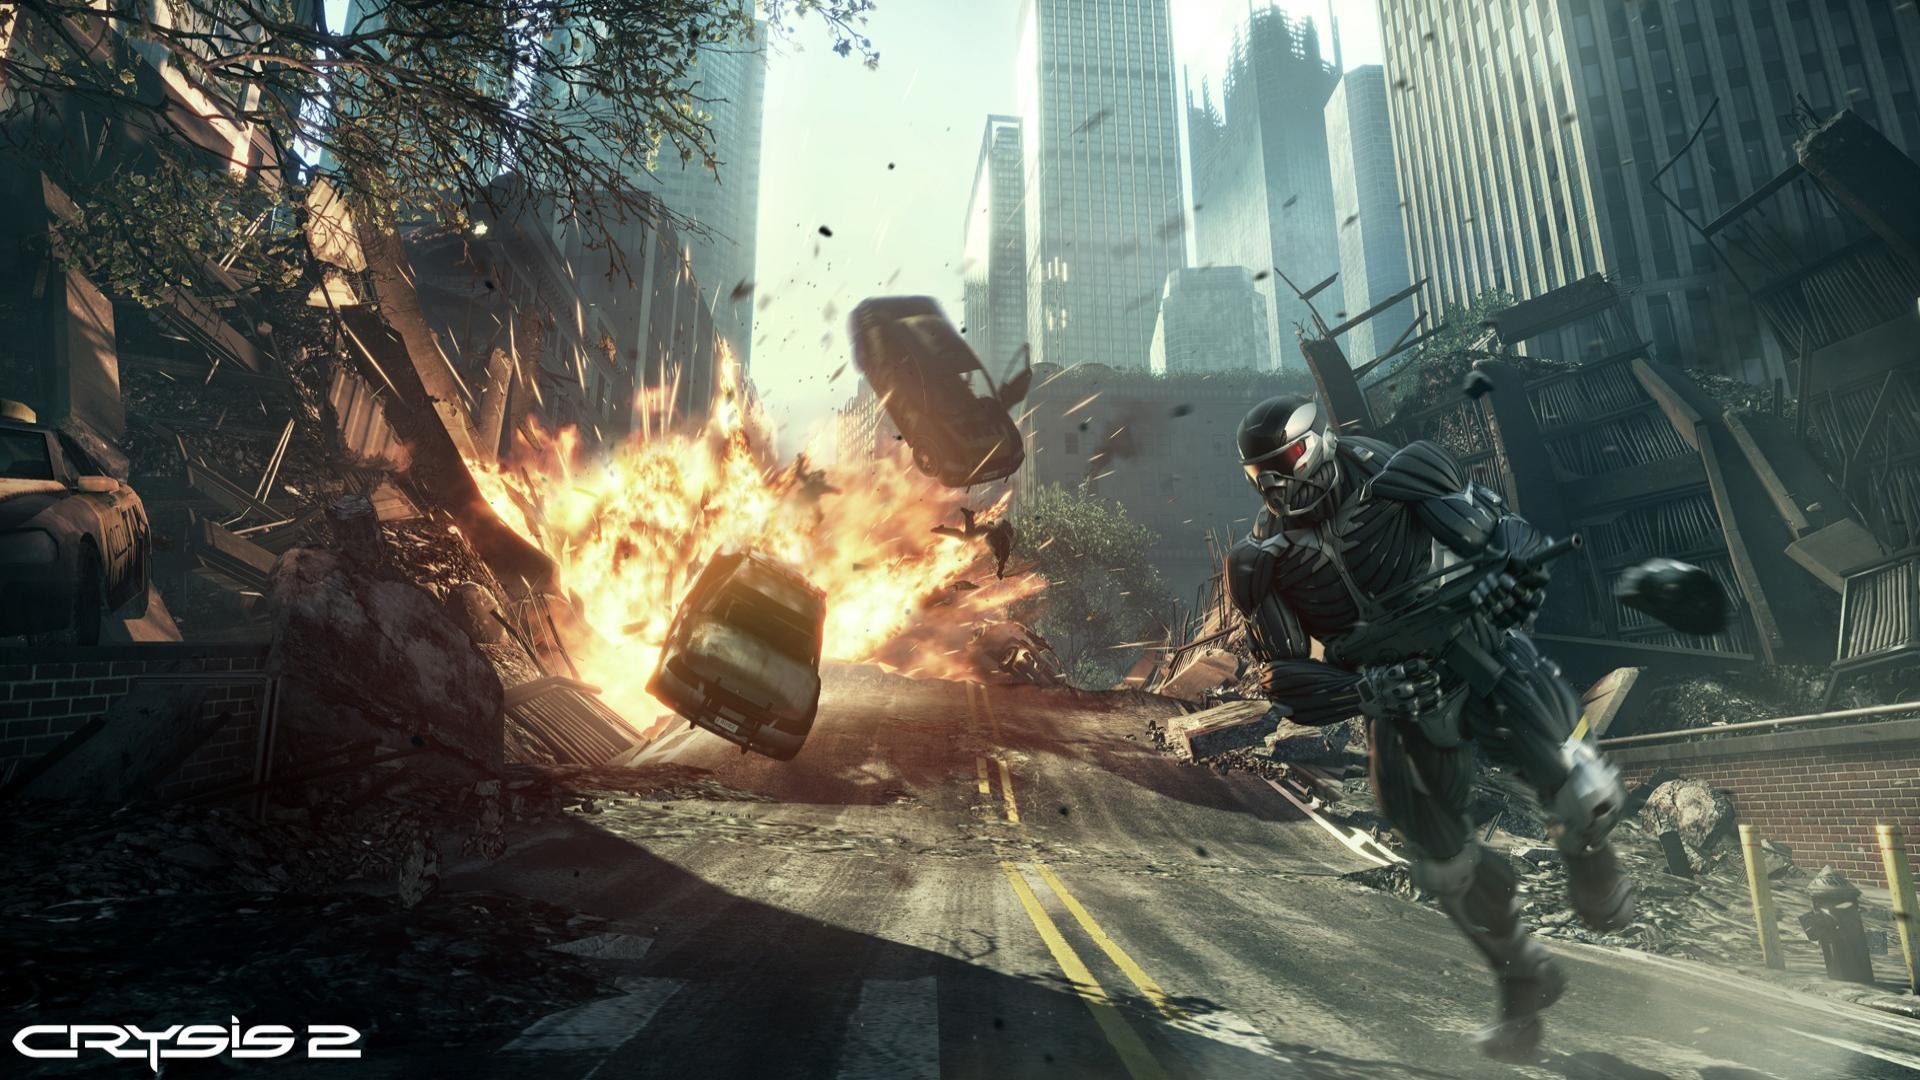 Download hd 1920x1080 Crysis 2 computer wallpaper ID:379781 for free